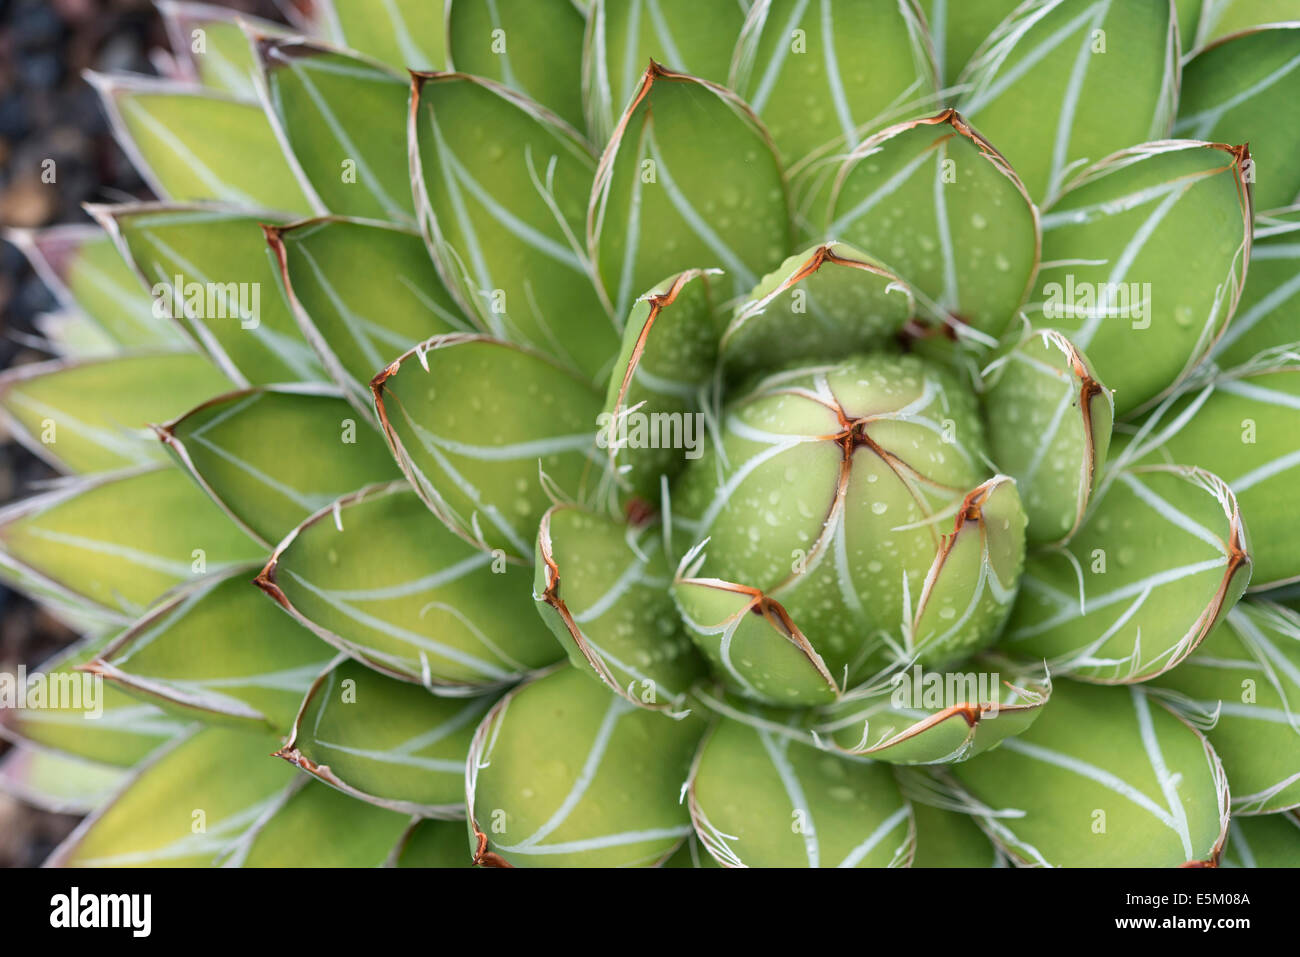 Queen Victoria Agave or Royal Agave (Agave victoriae-reginae), native to Mexico Stock Photo